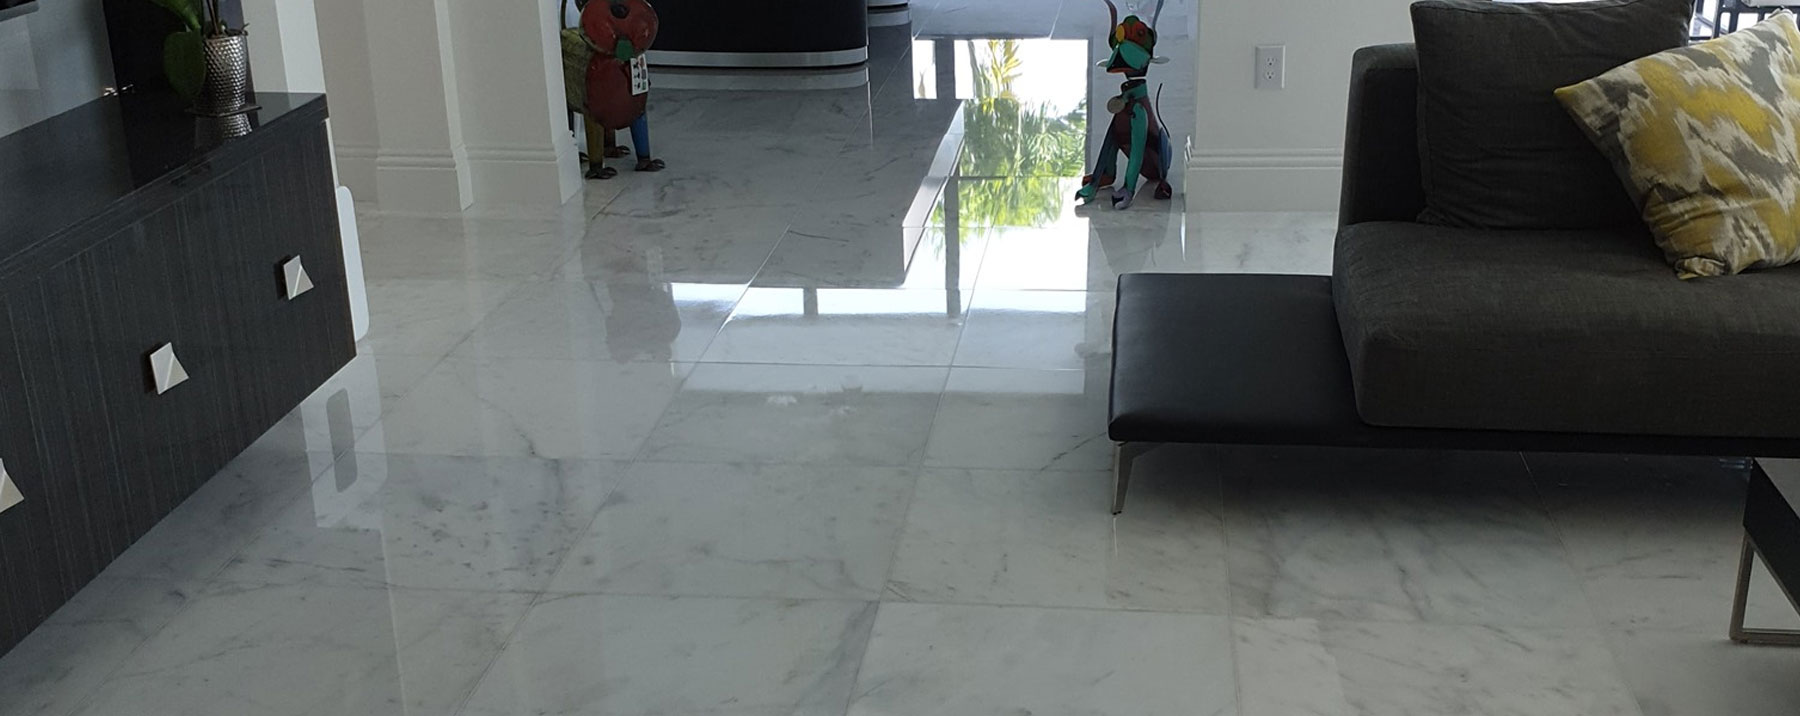 Grout Cleaning in Palm Beach, FL